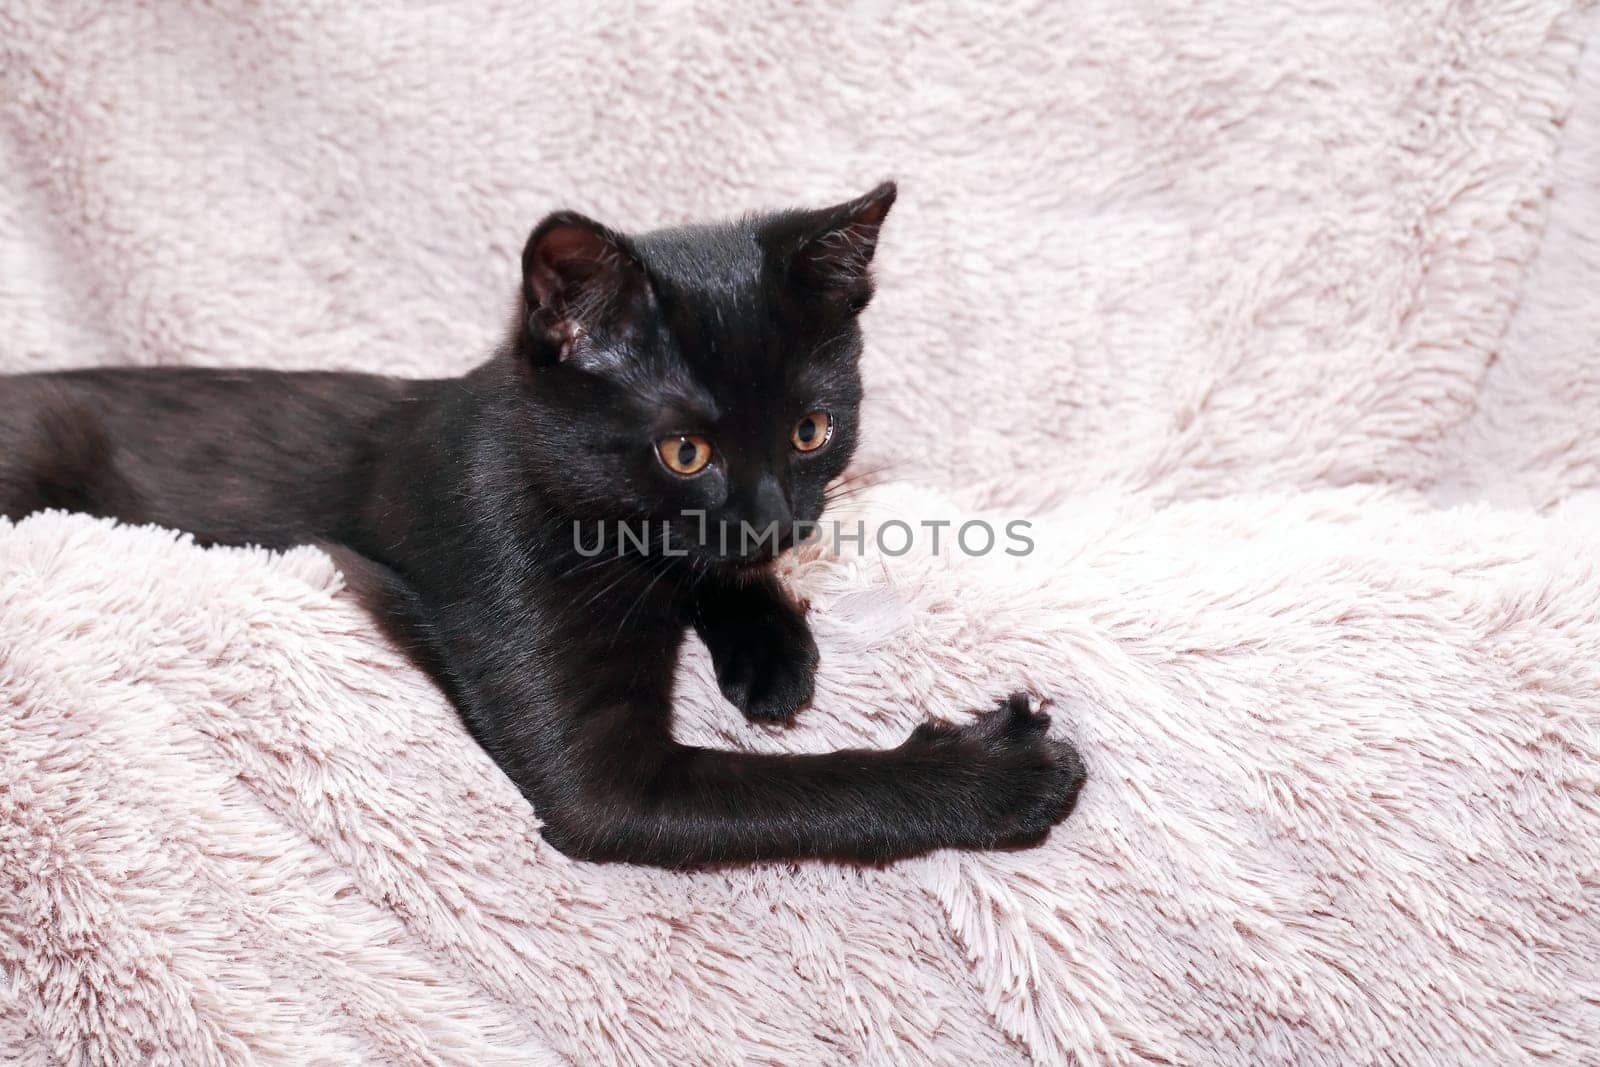 A small black kitten playing on a fabric background